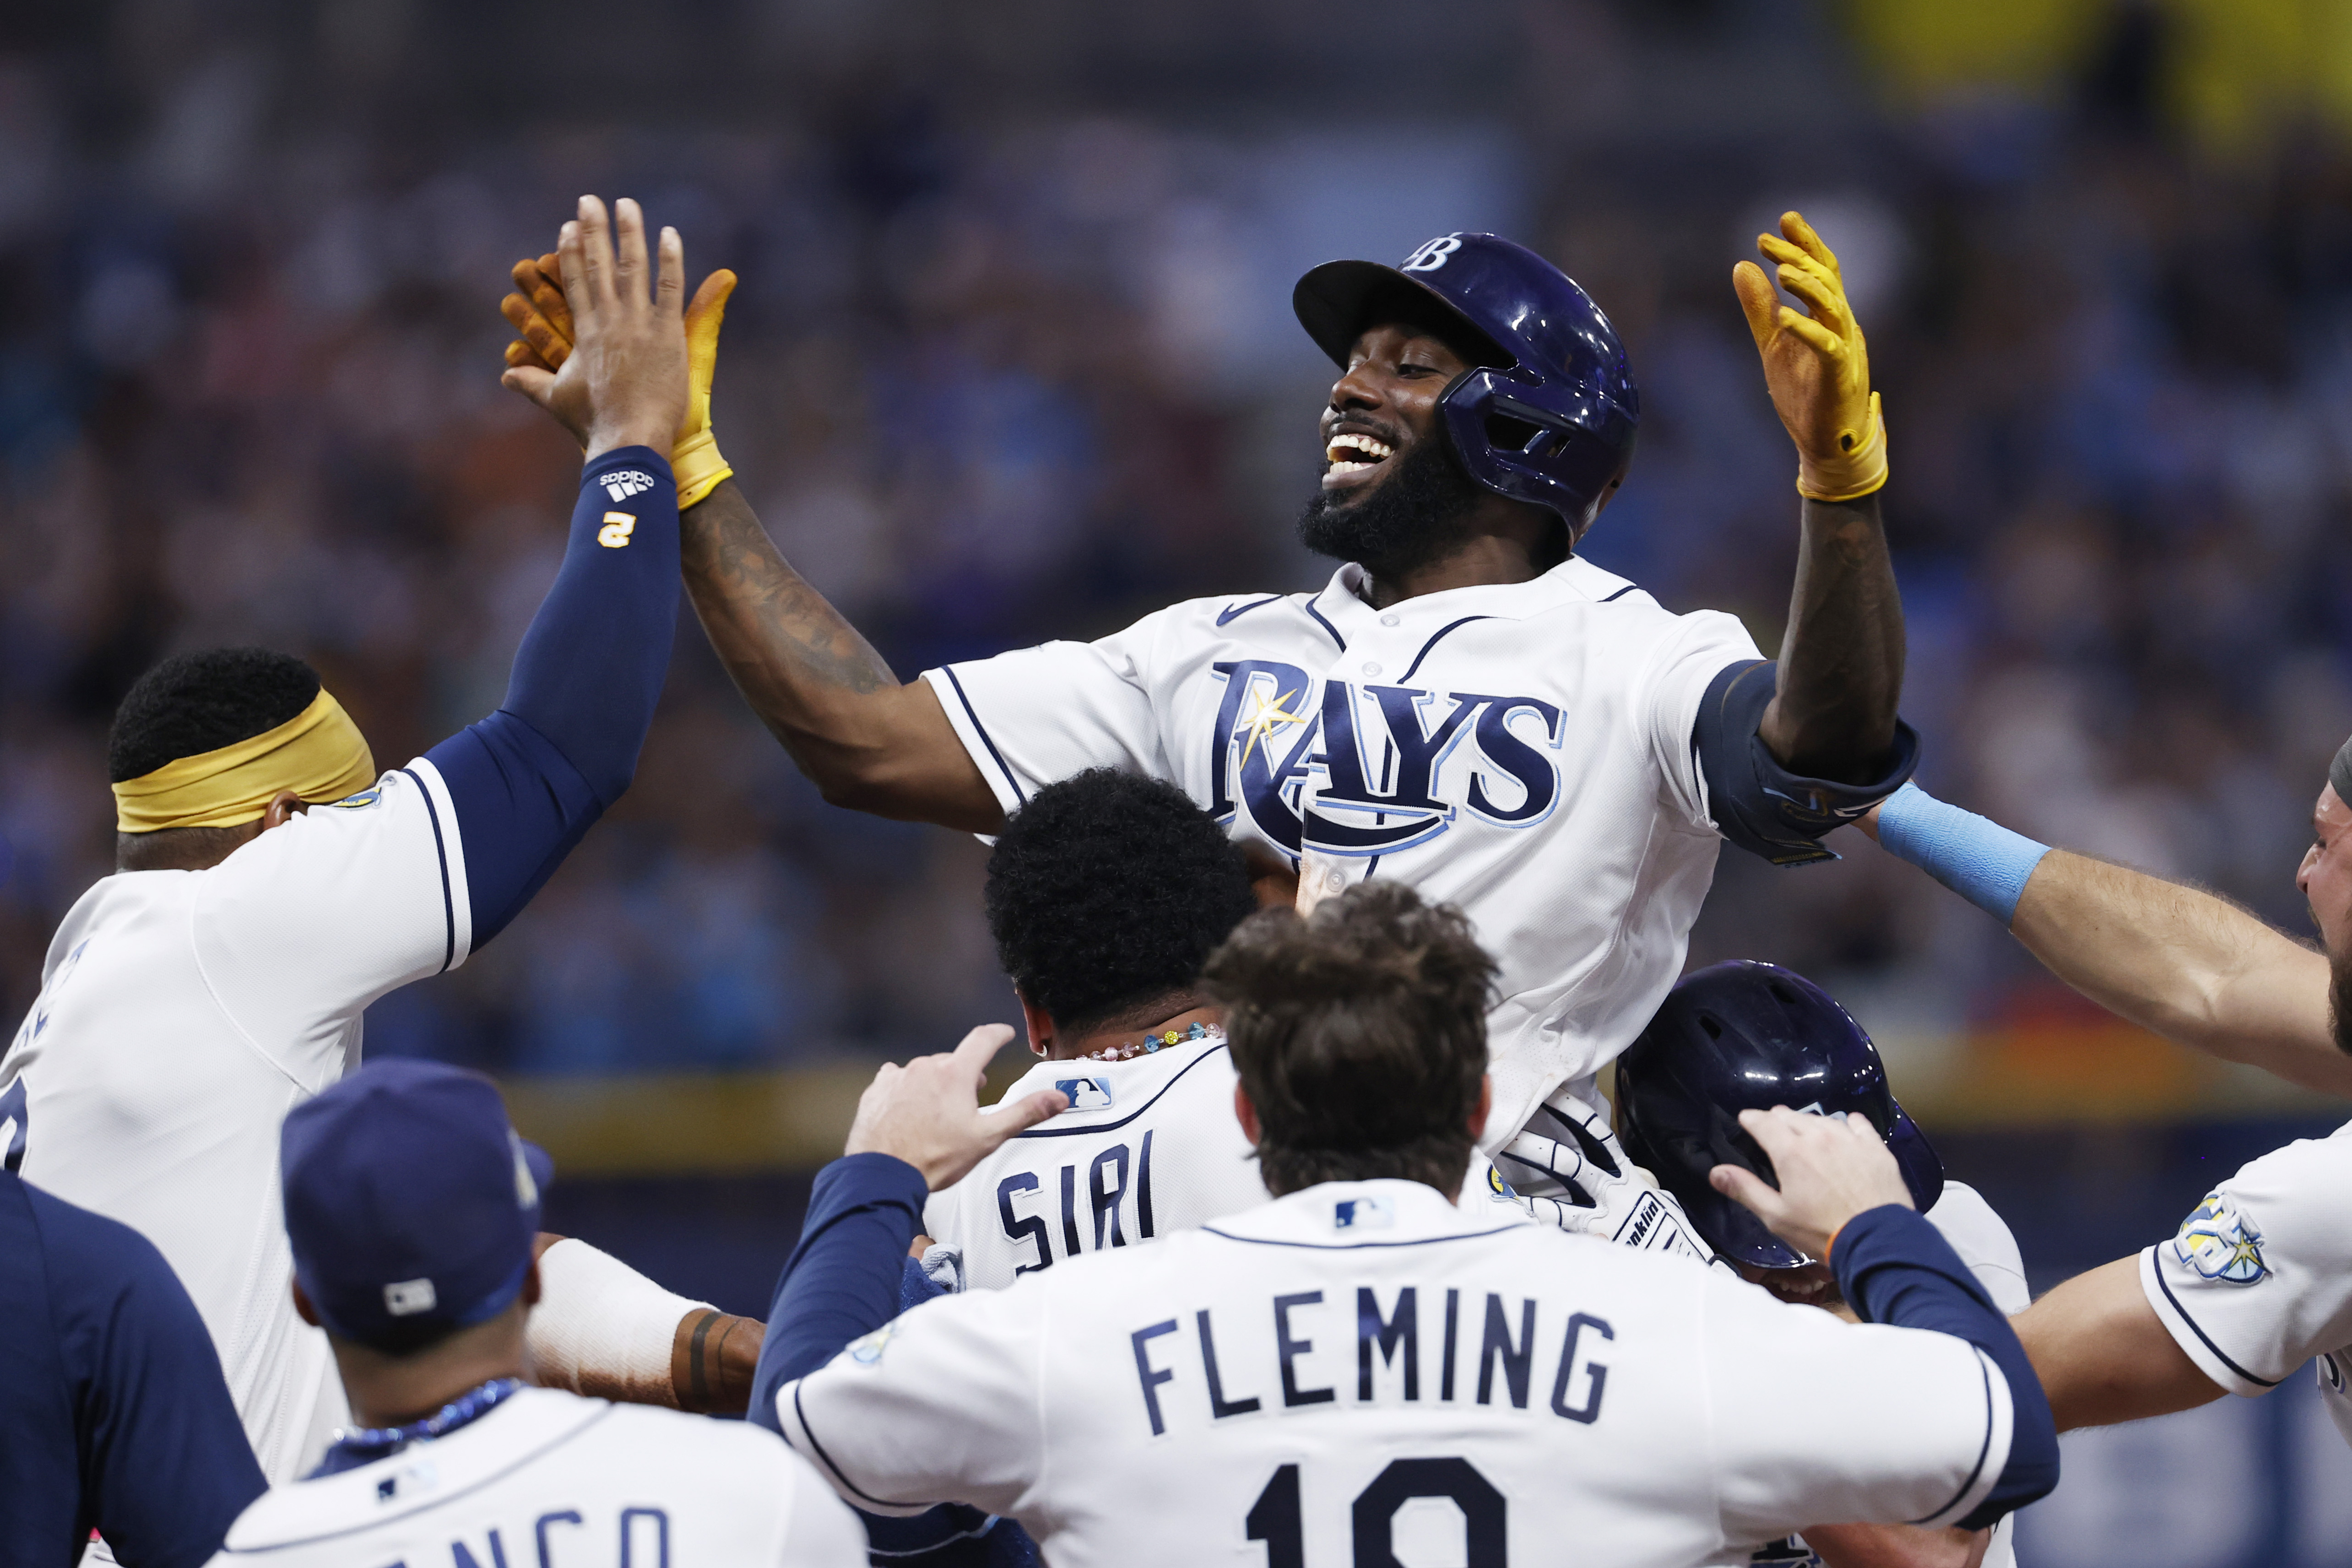 Angels vs. Rays prediction and MLB pick today as we target a favorite